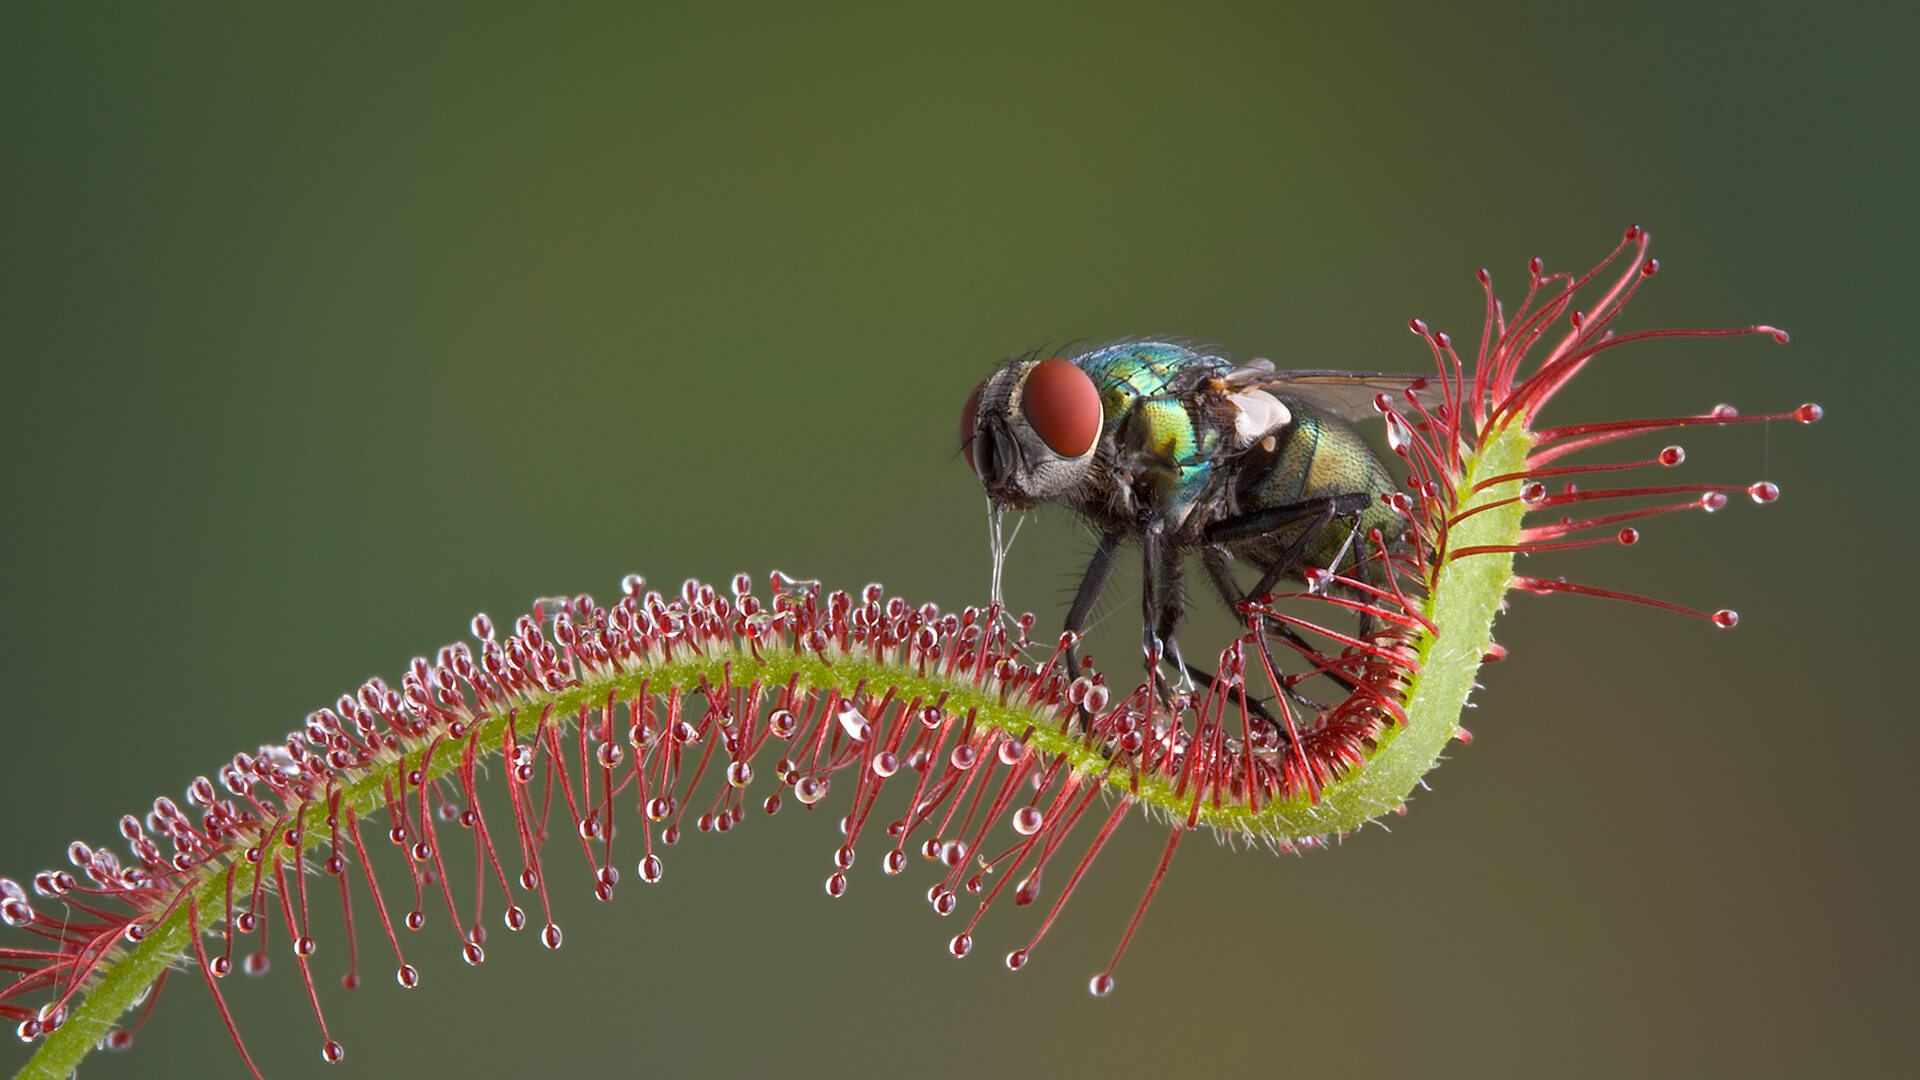 A common fly trapped by a sundew